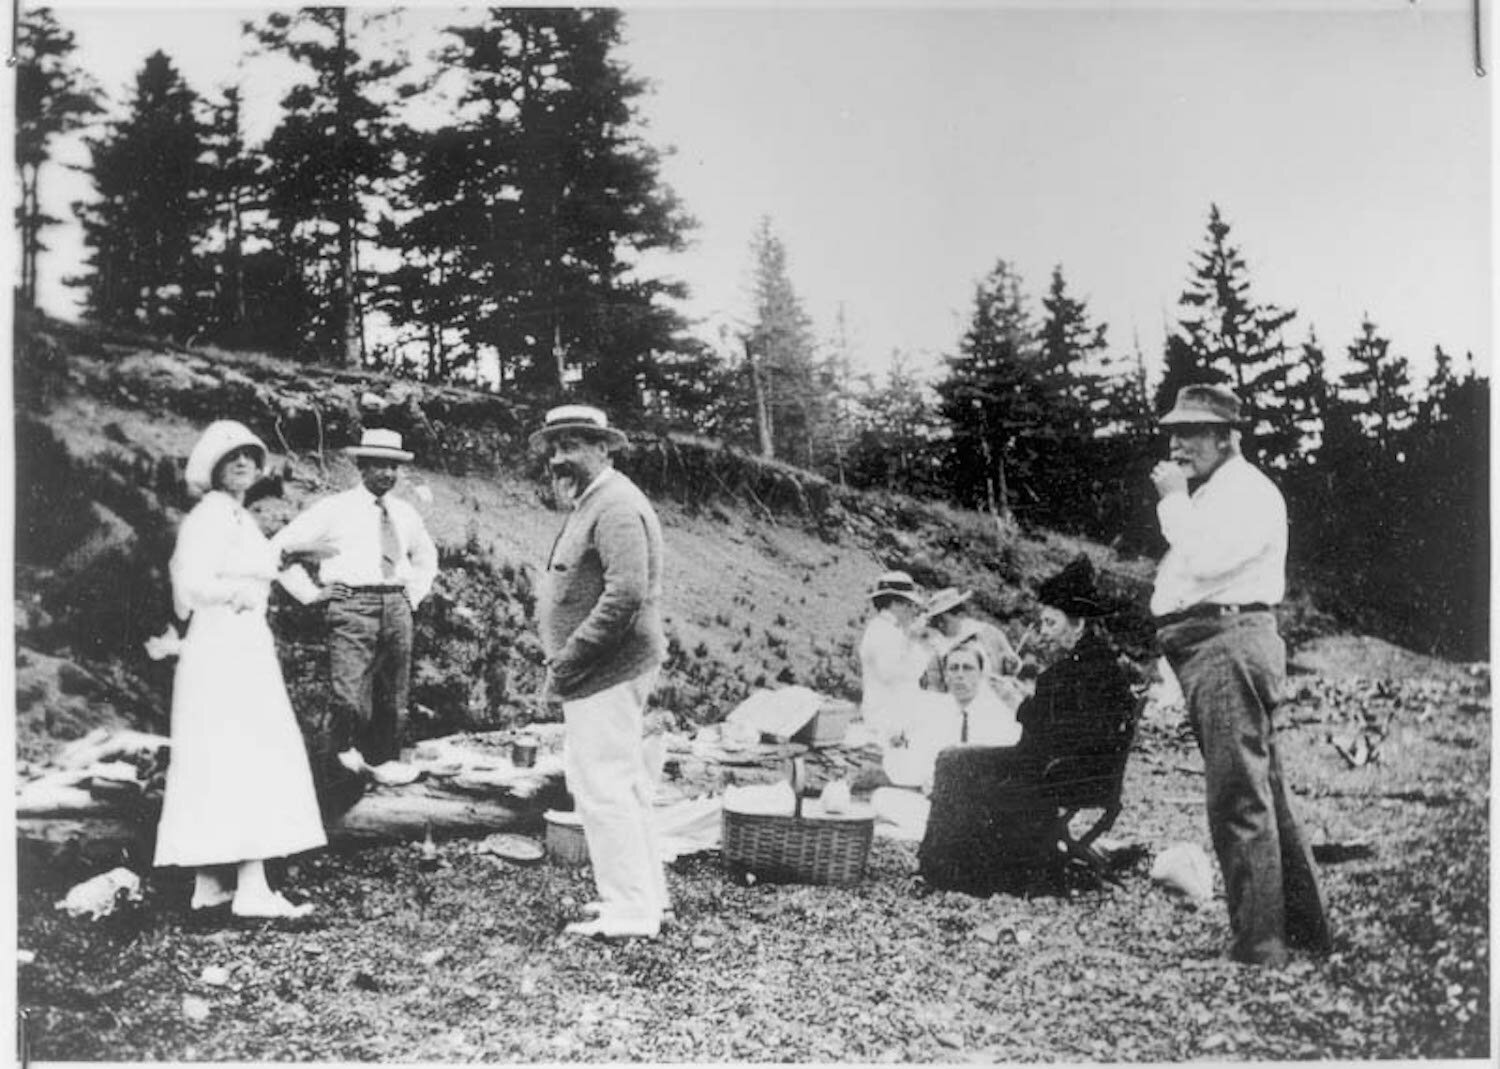  Franklin D. Roosevelt with Sara Delano Roosevelt and Eleanor Roosevelt in group shot in Campobello, New Brunswick, Canada. (1906)